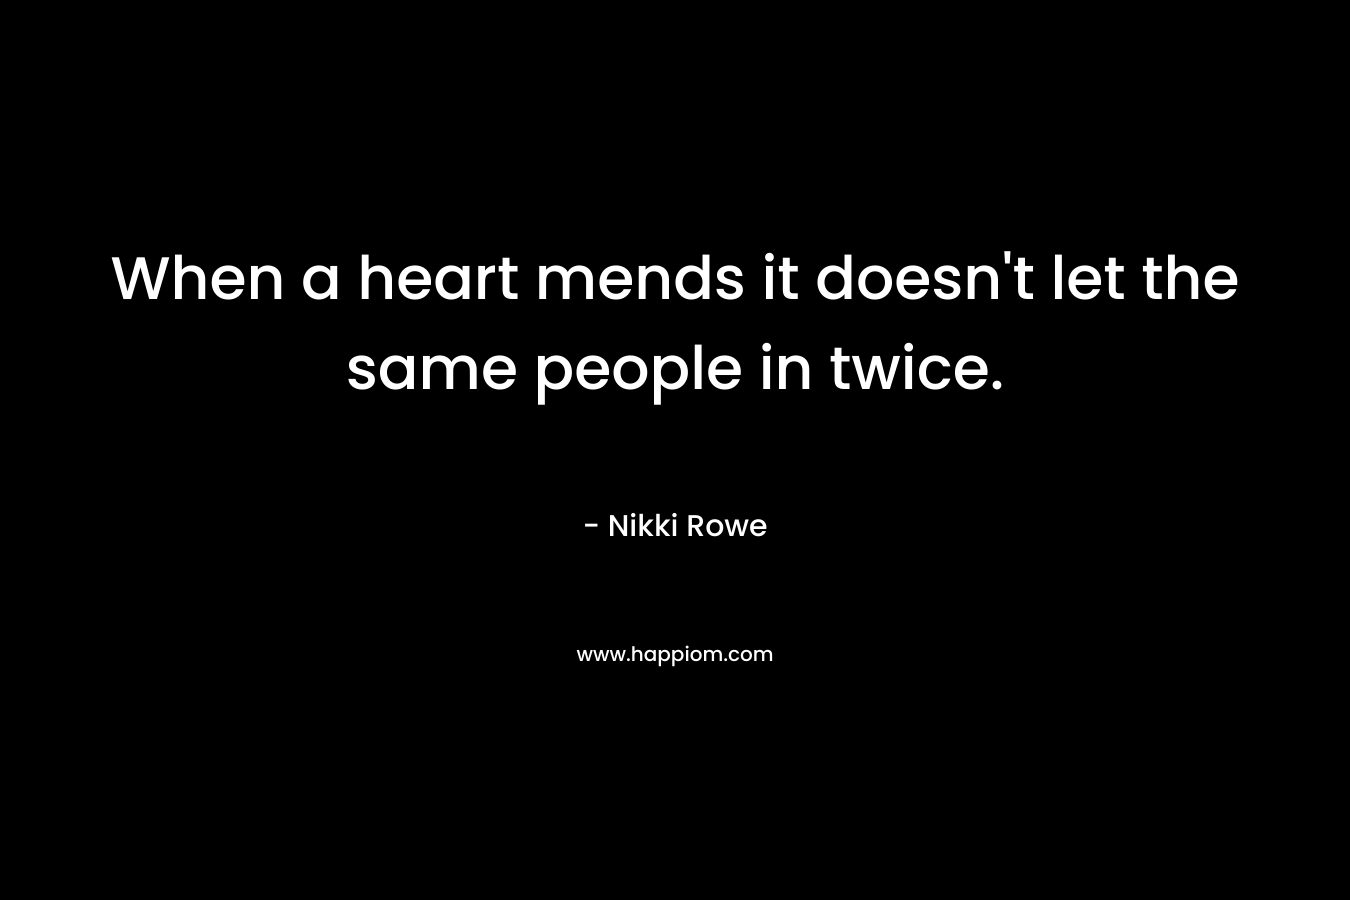 When a heart mends it doesn't let the same people in twice.